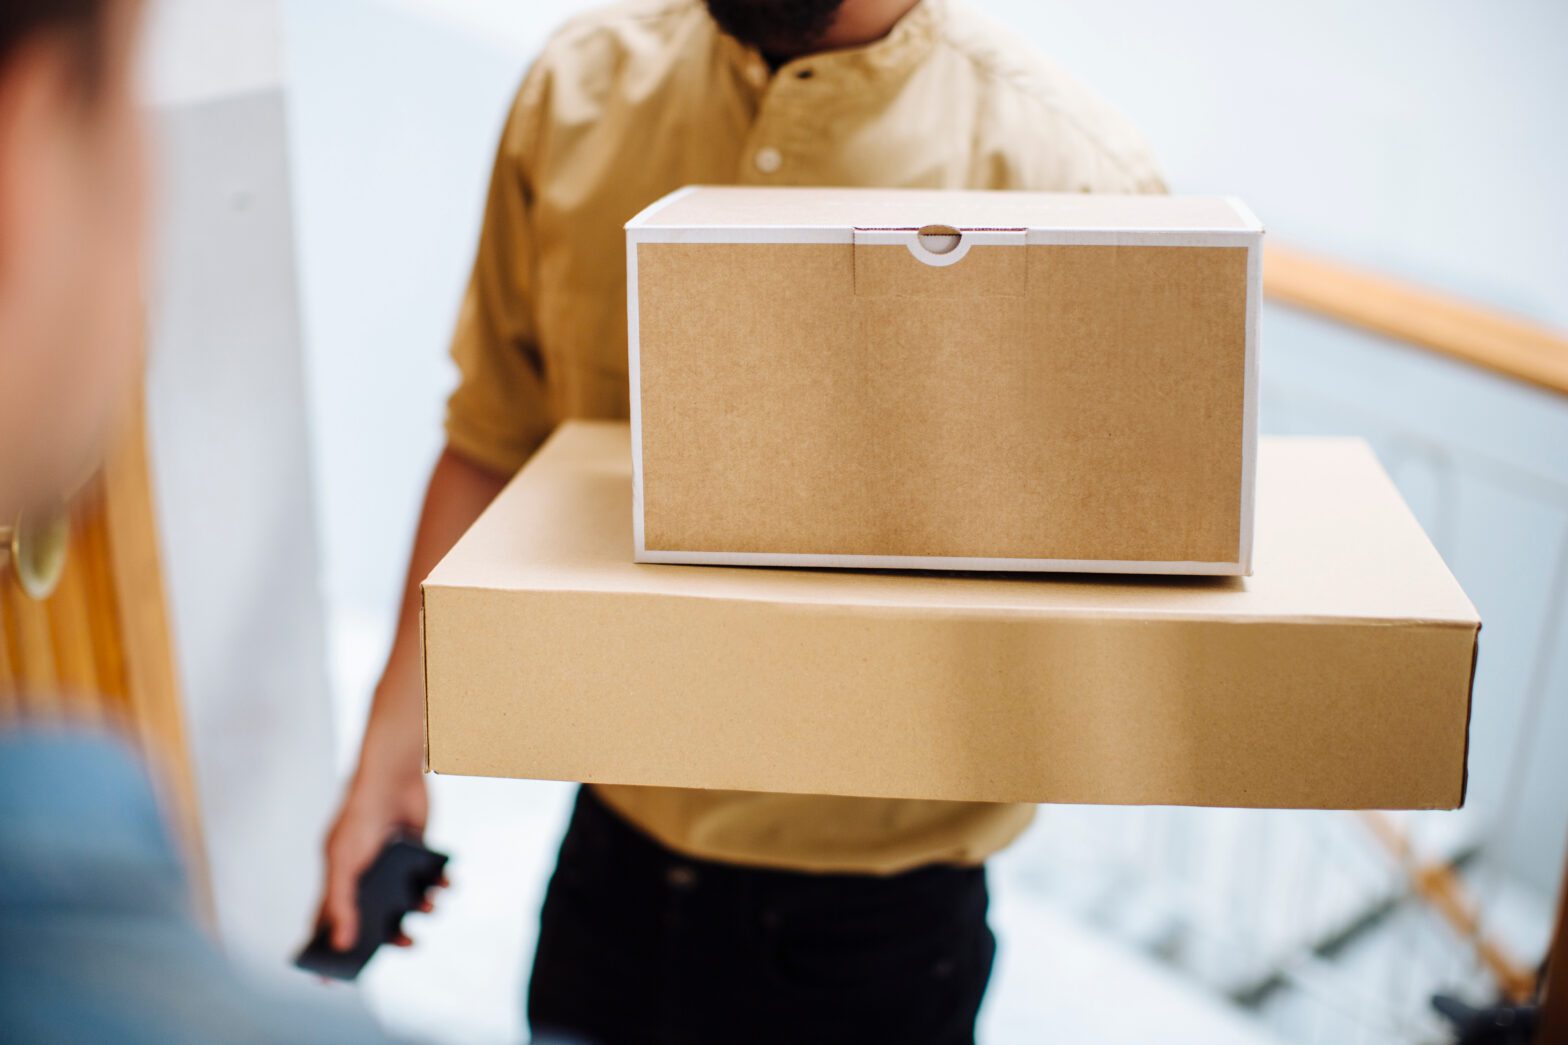 Image of delivery person in a yellow shirt with dark pants handing two boxes stacked on top of one another to the recipient.